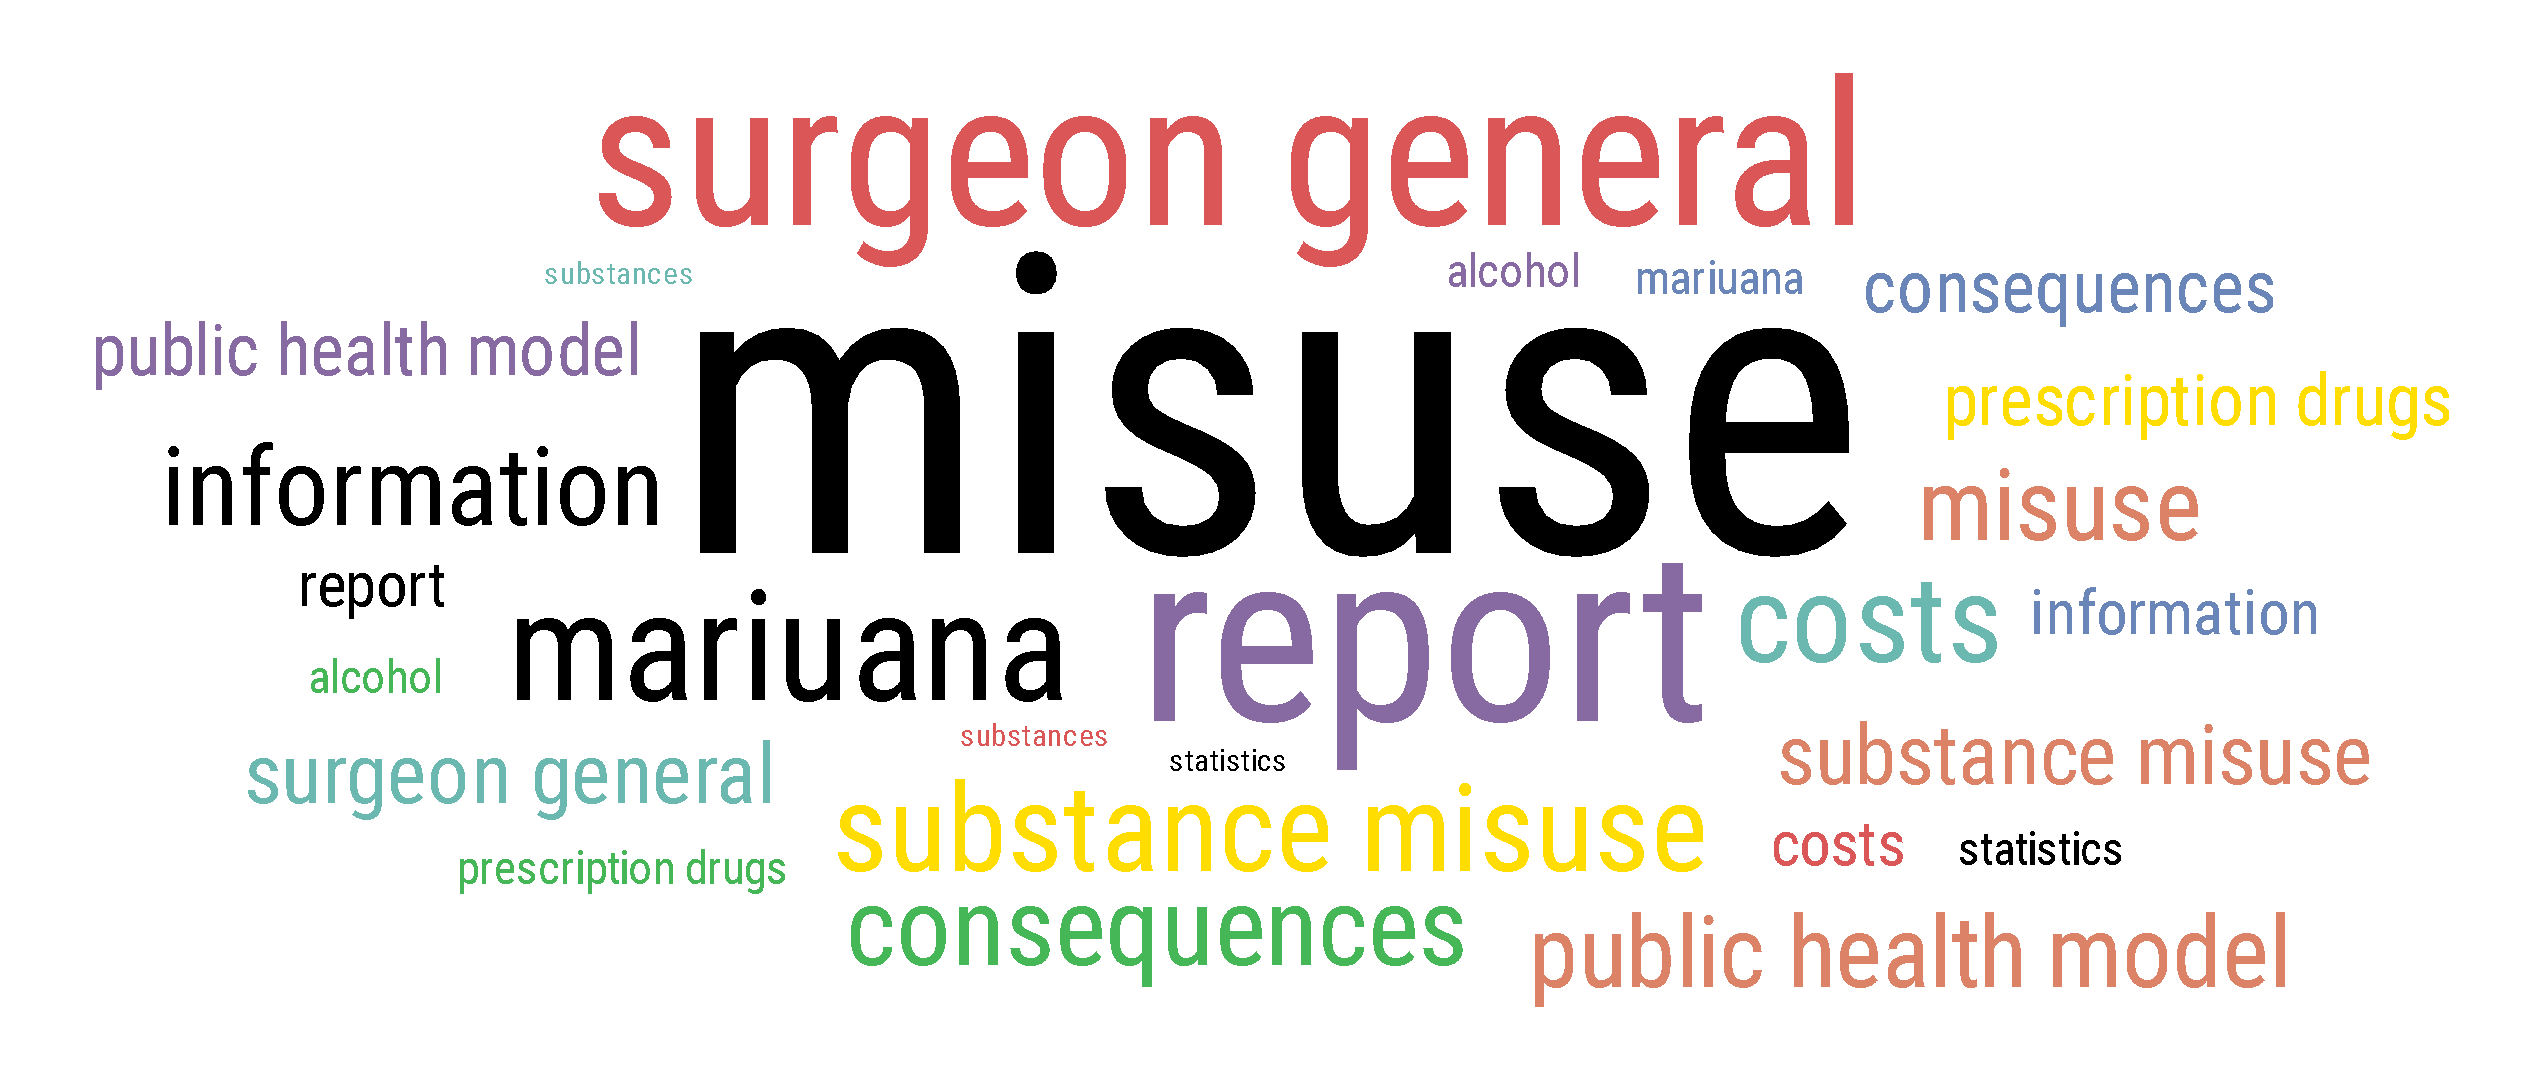 Surgeon General's Report: Substance Misuse